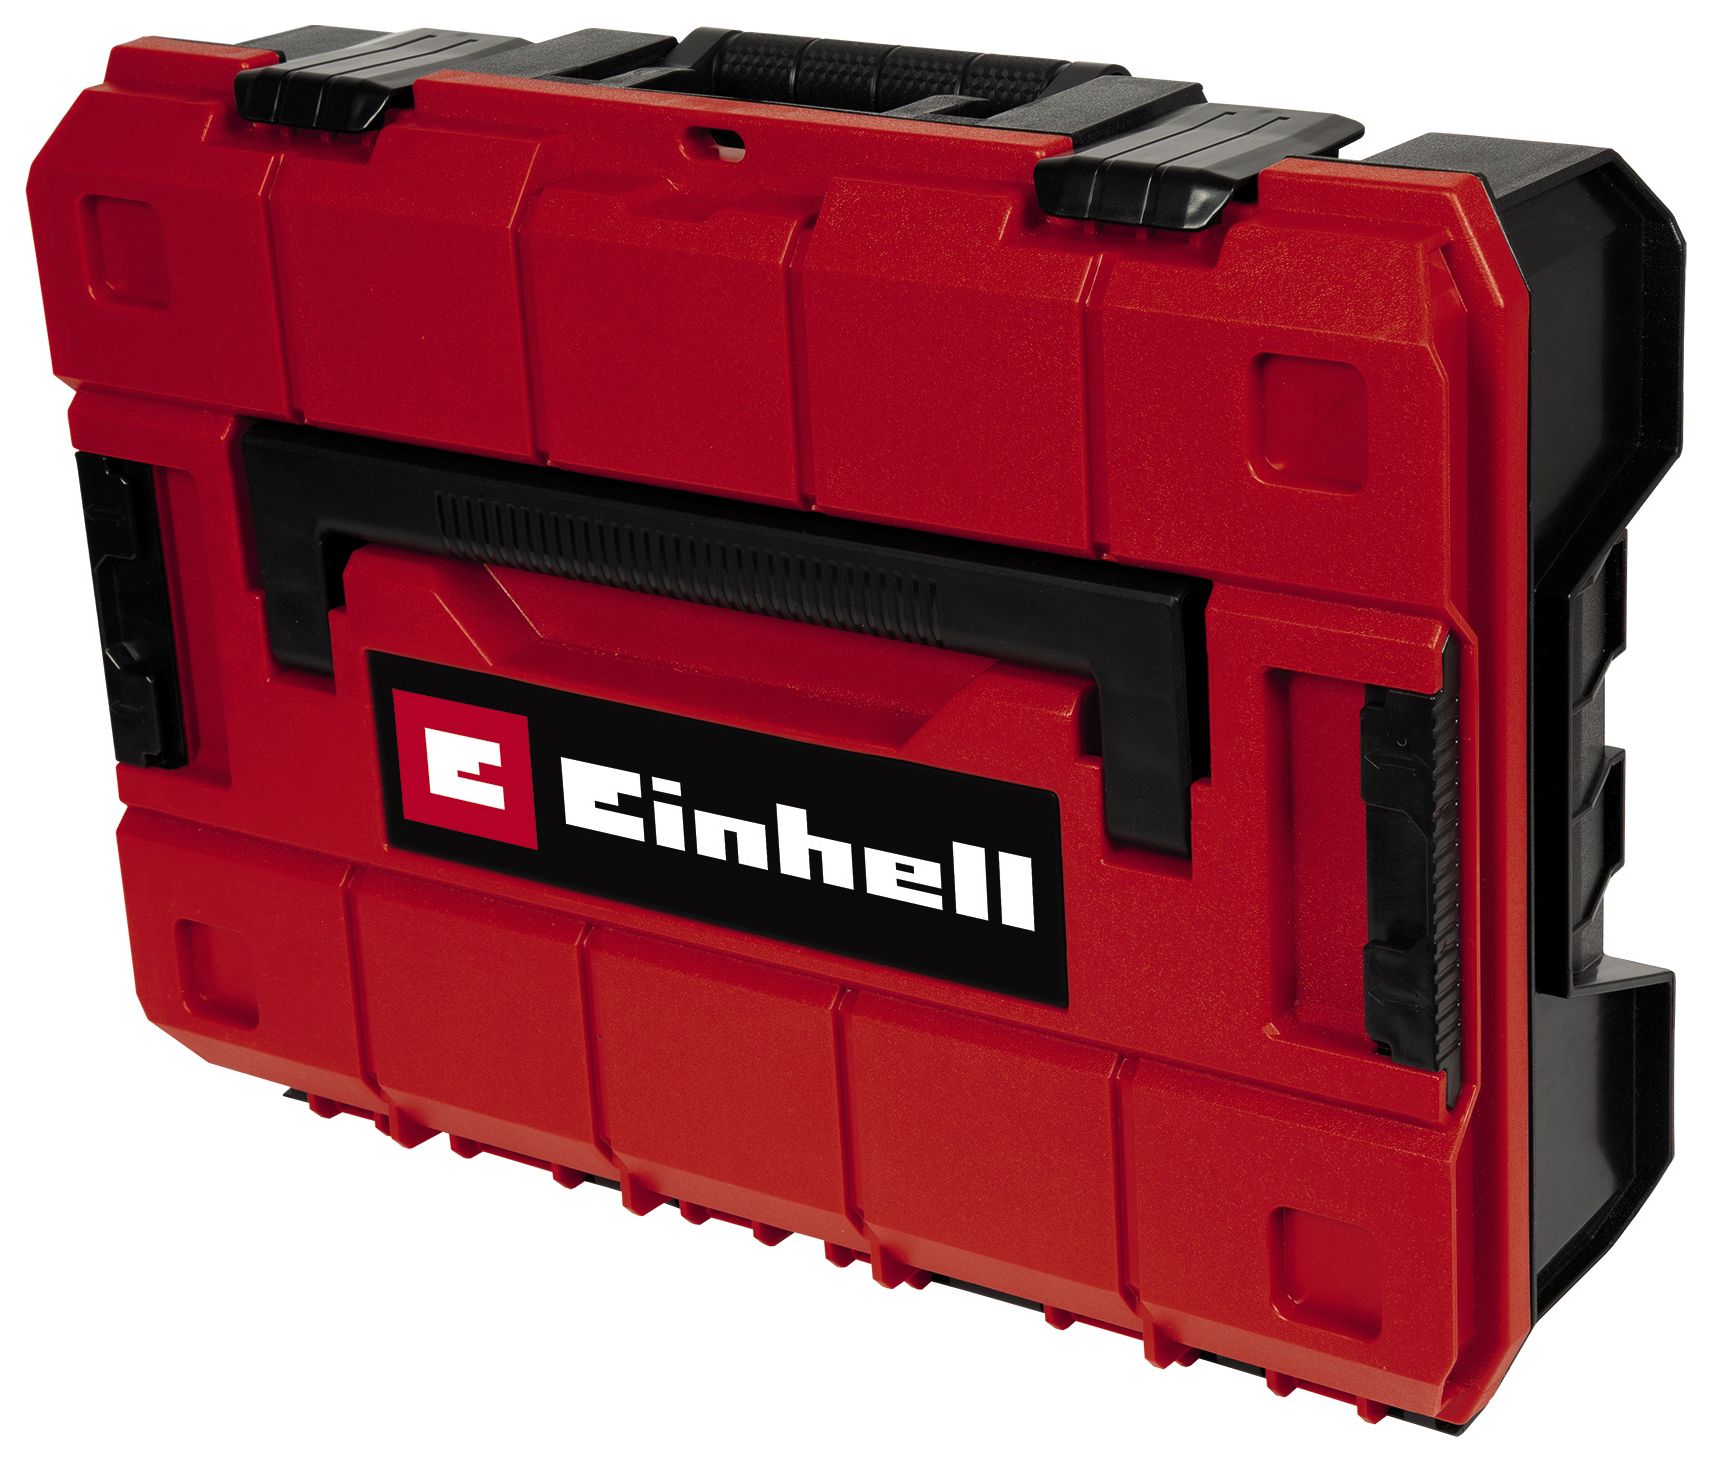 Einhell Stackable E-Case S-F with Foam Inserts